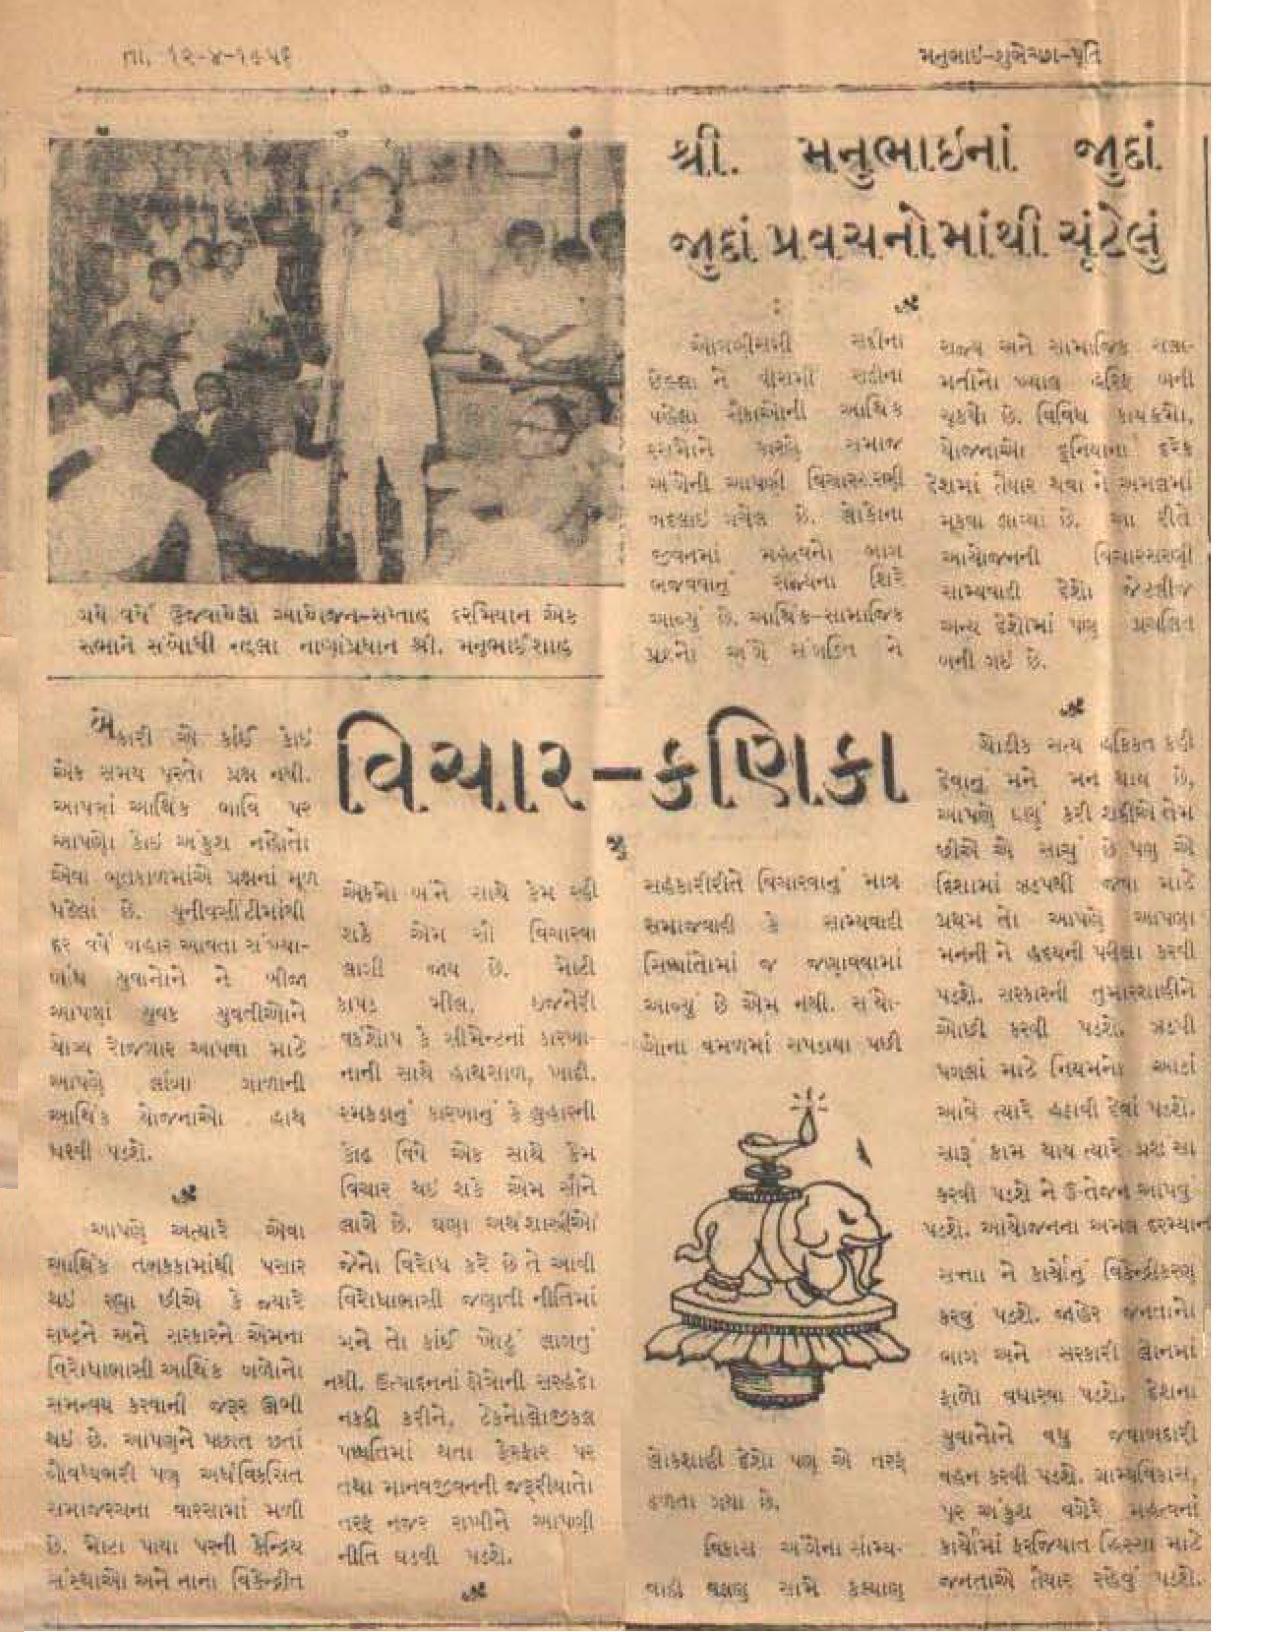 Excerpts from speeches made by Manubhai in Saurashtra